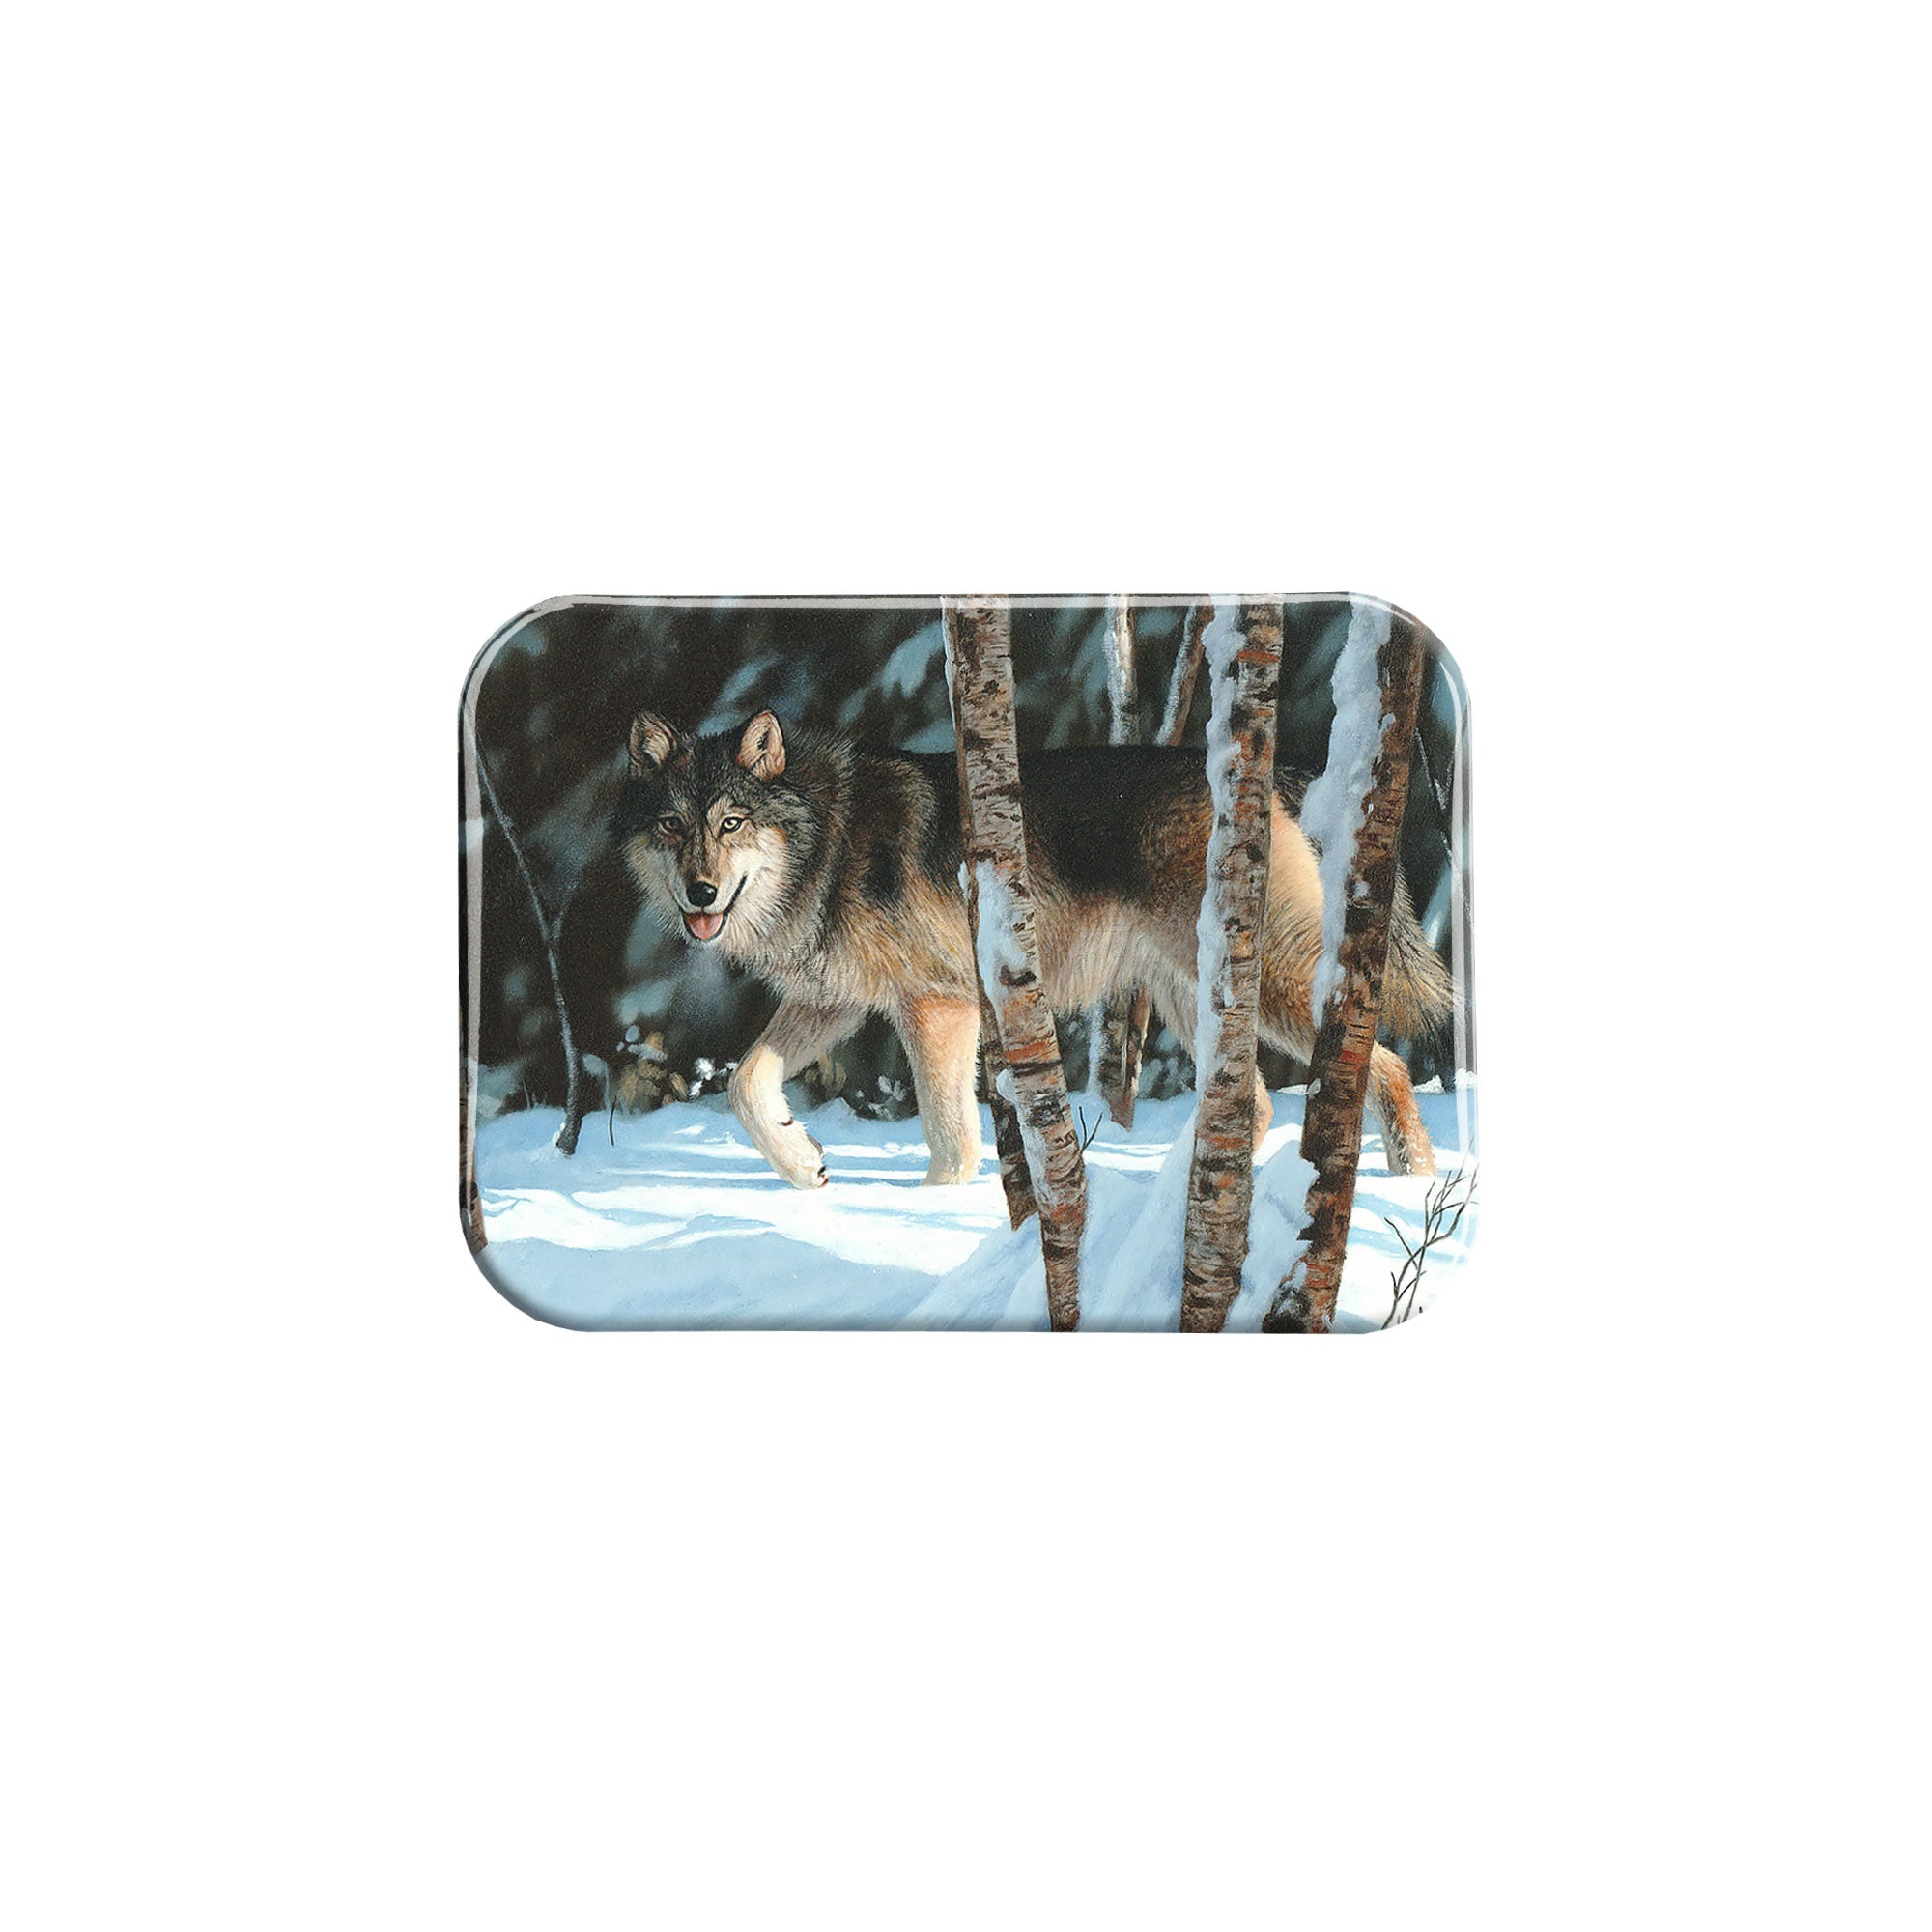 "Icy Stare" - 2.5" X 3.5" Rectangle Fridge Magnets